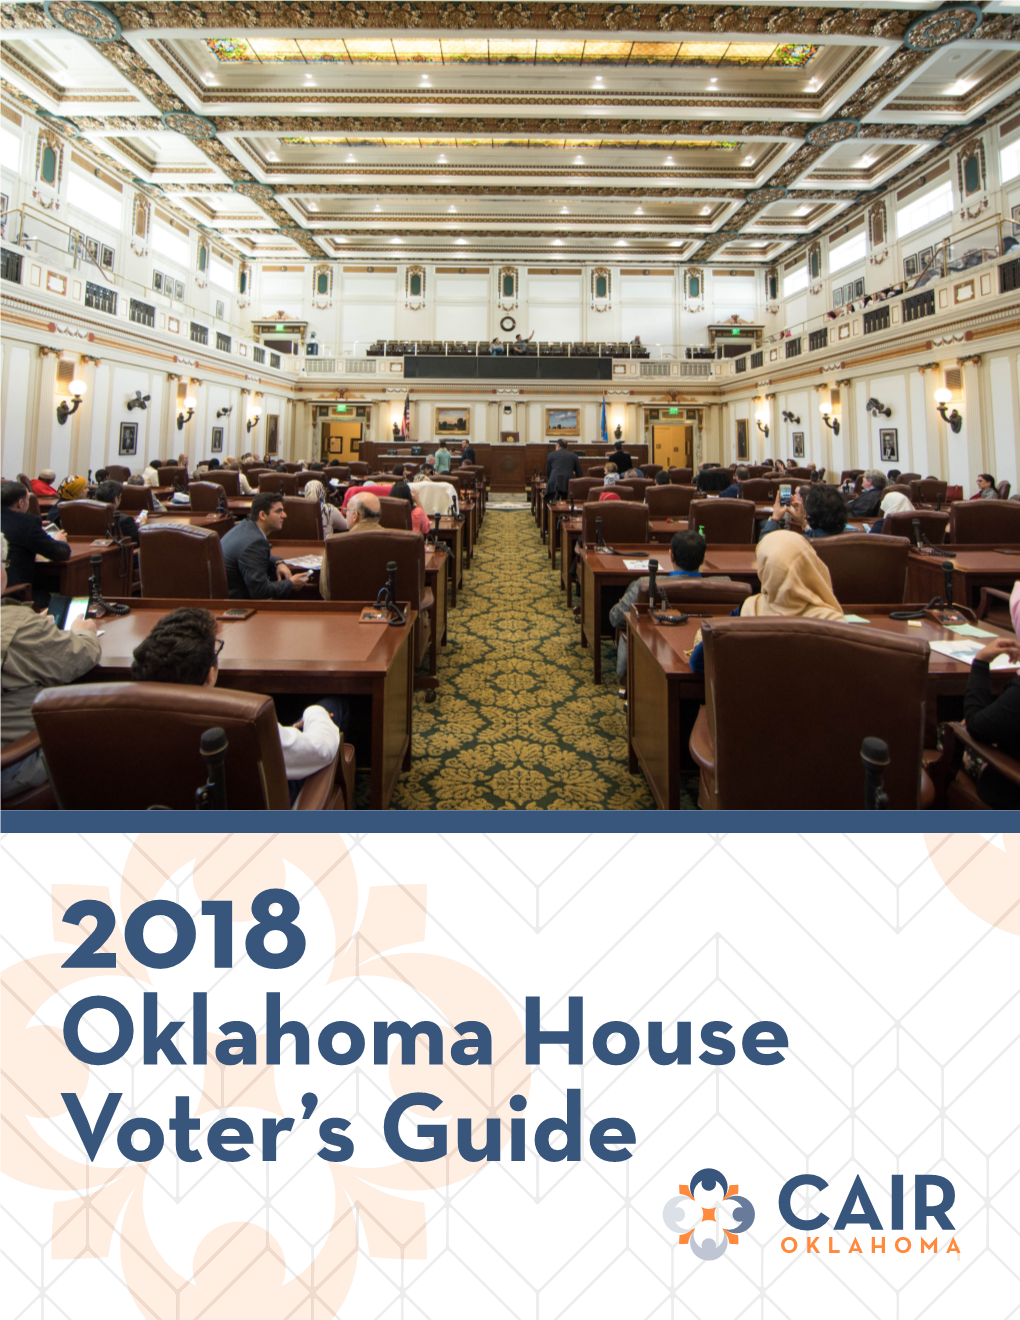 Oklahoma House Voter's Guide